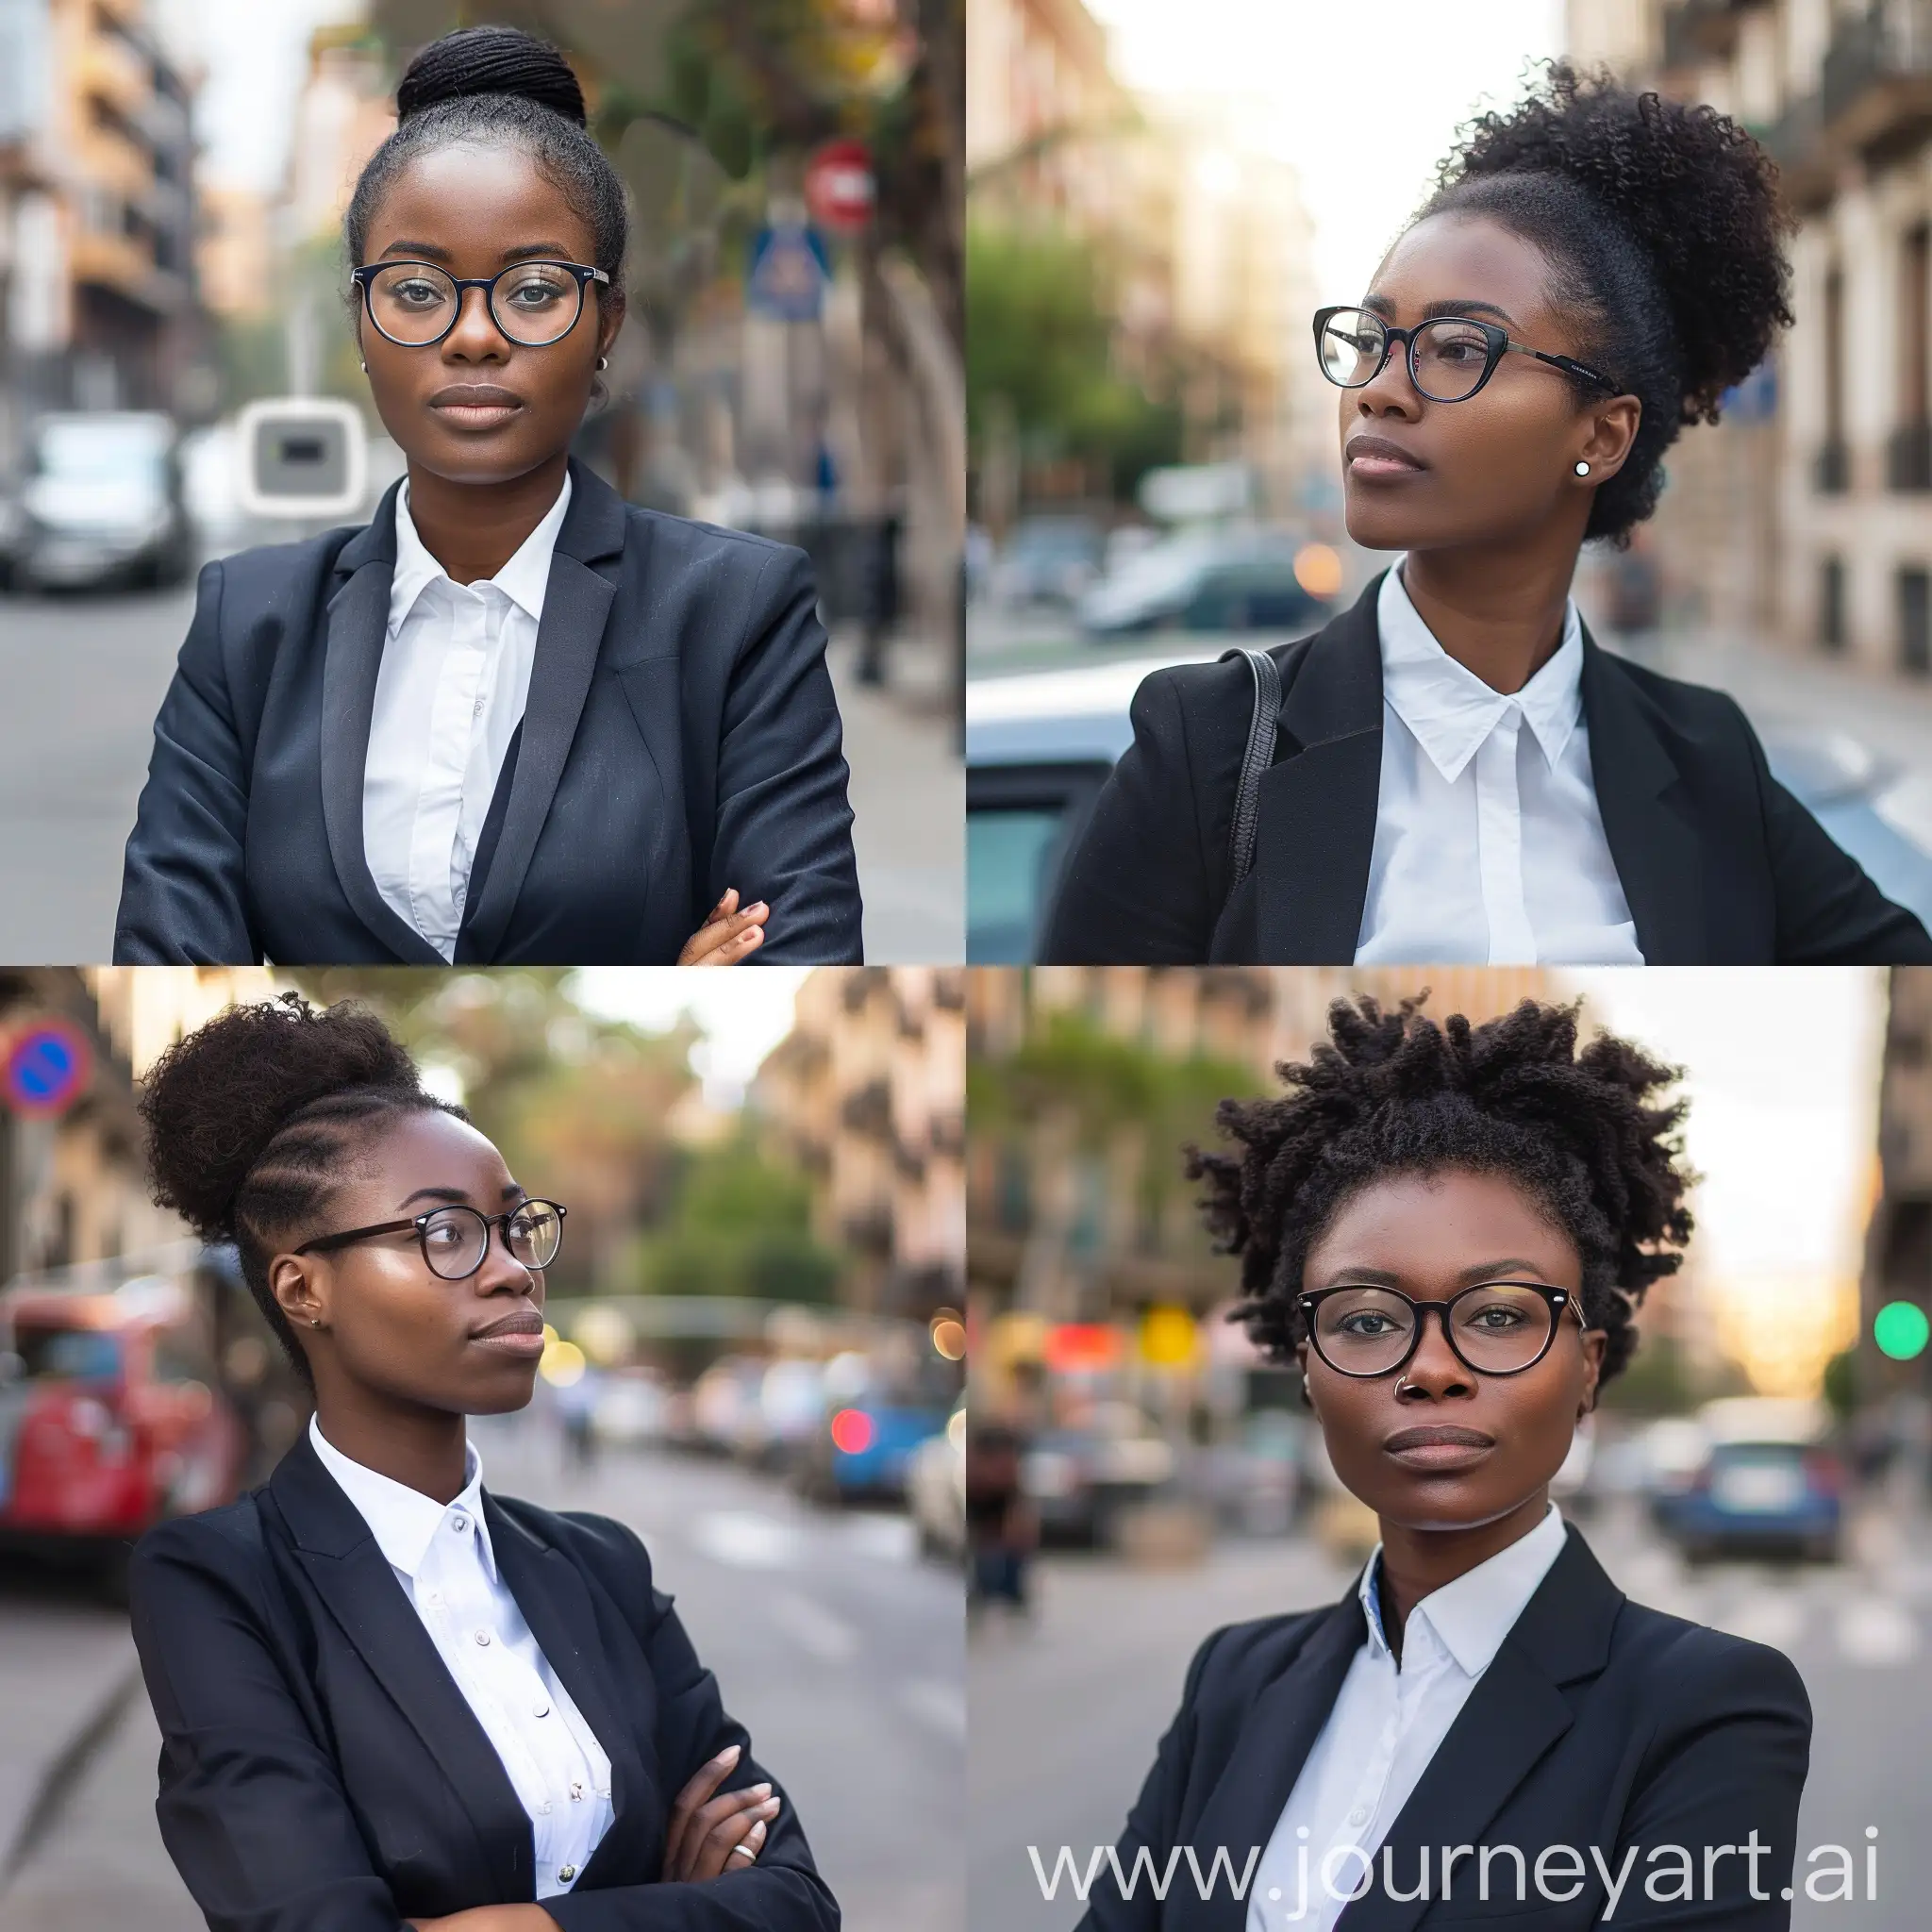 Black woman with glasses in business suit waiting for driverless car in Barcelona